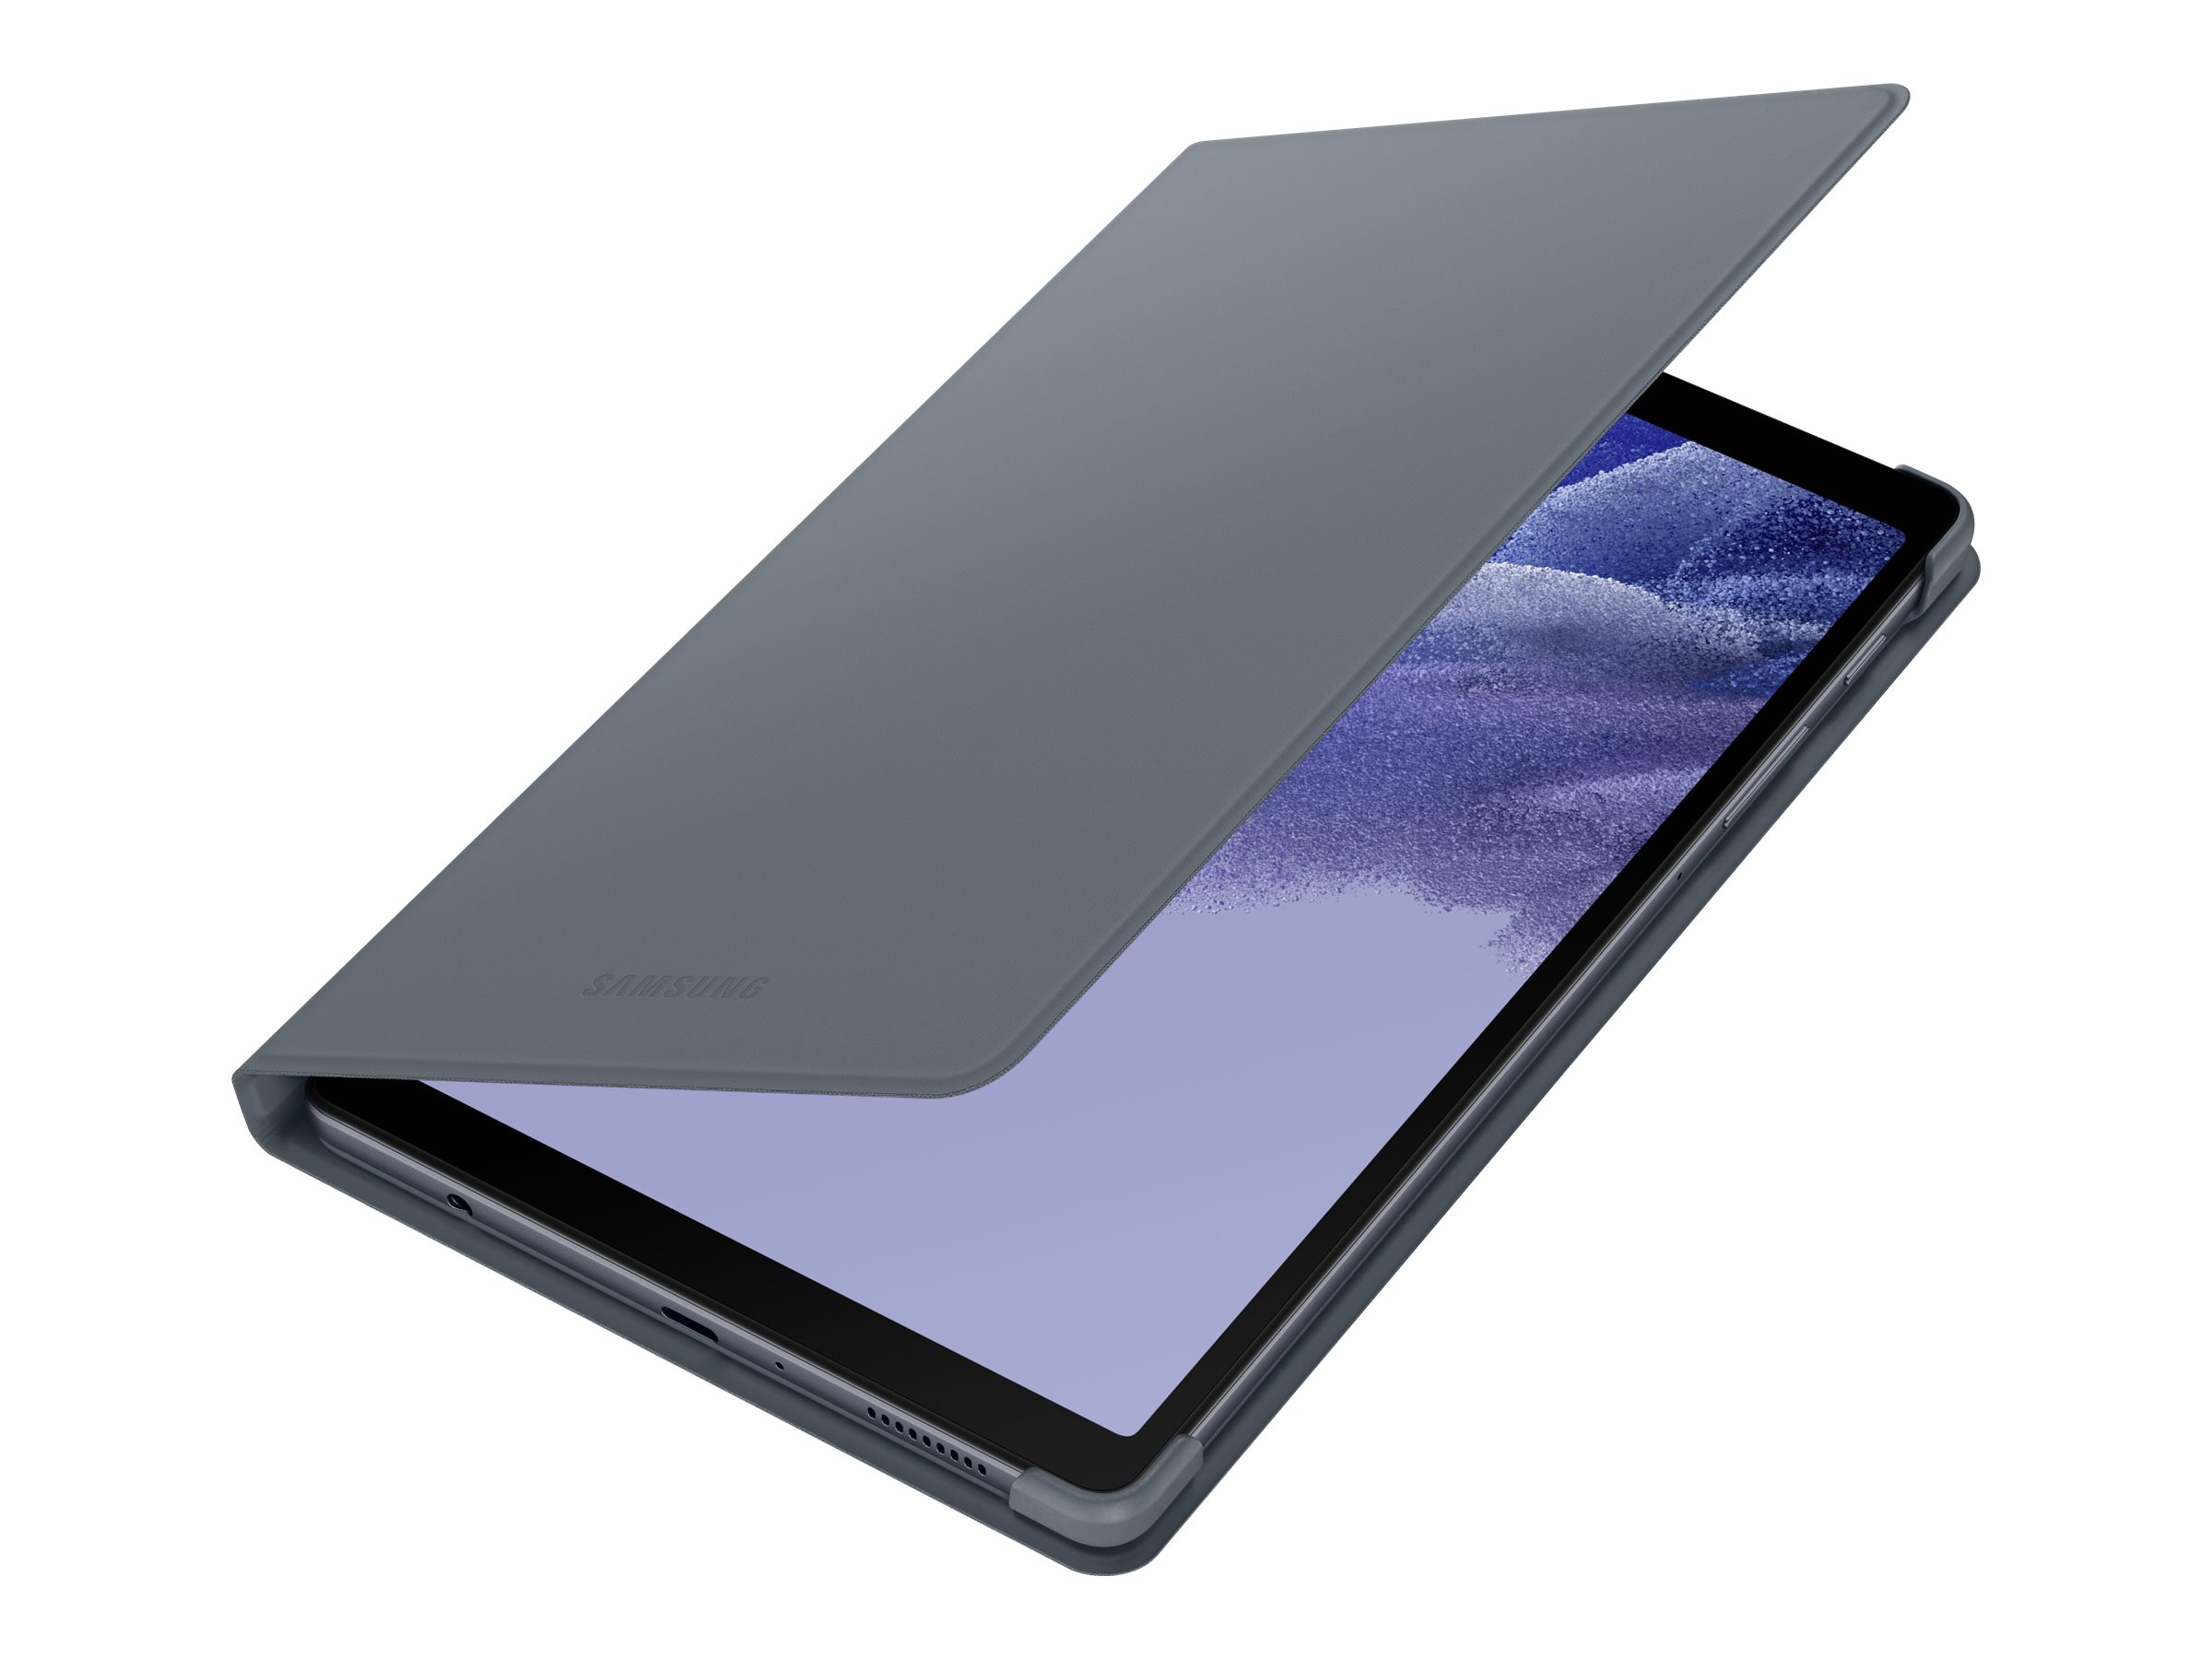 Samsung Galaxy Tab A7 Lite specs and render surface -  news